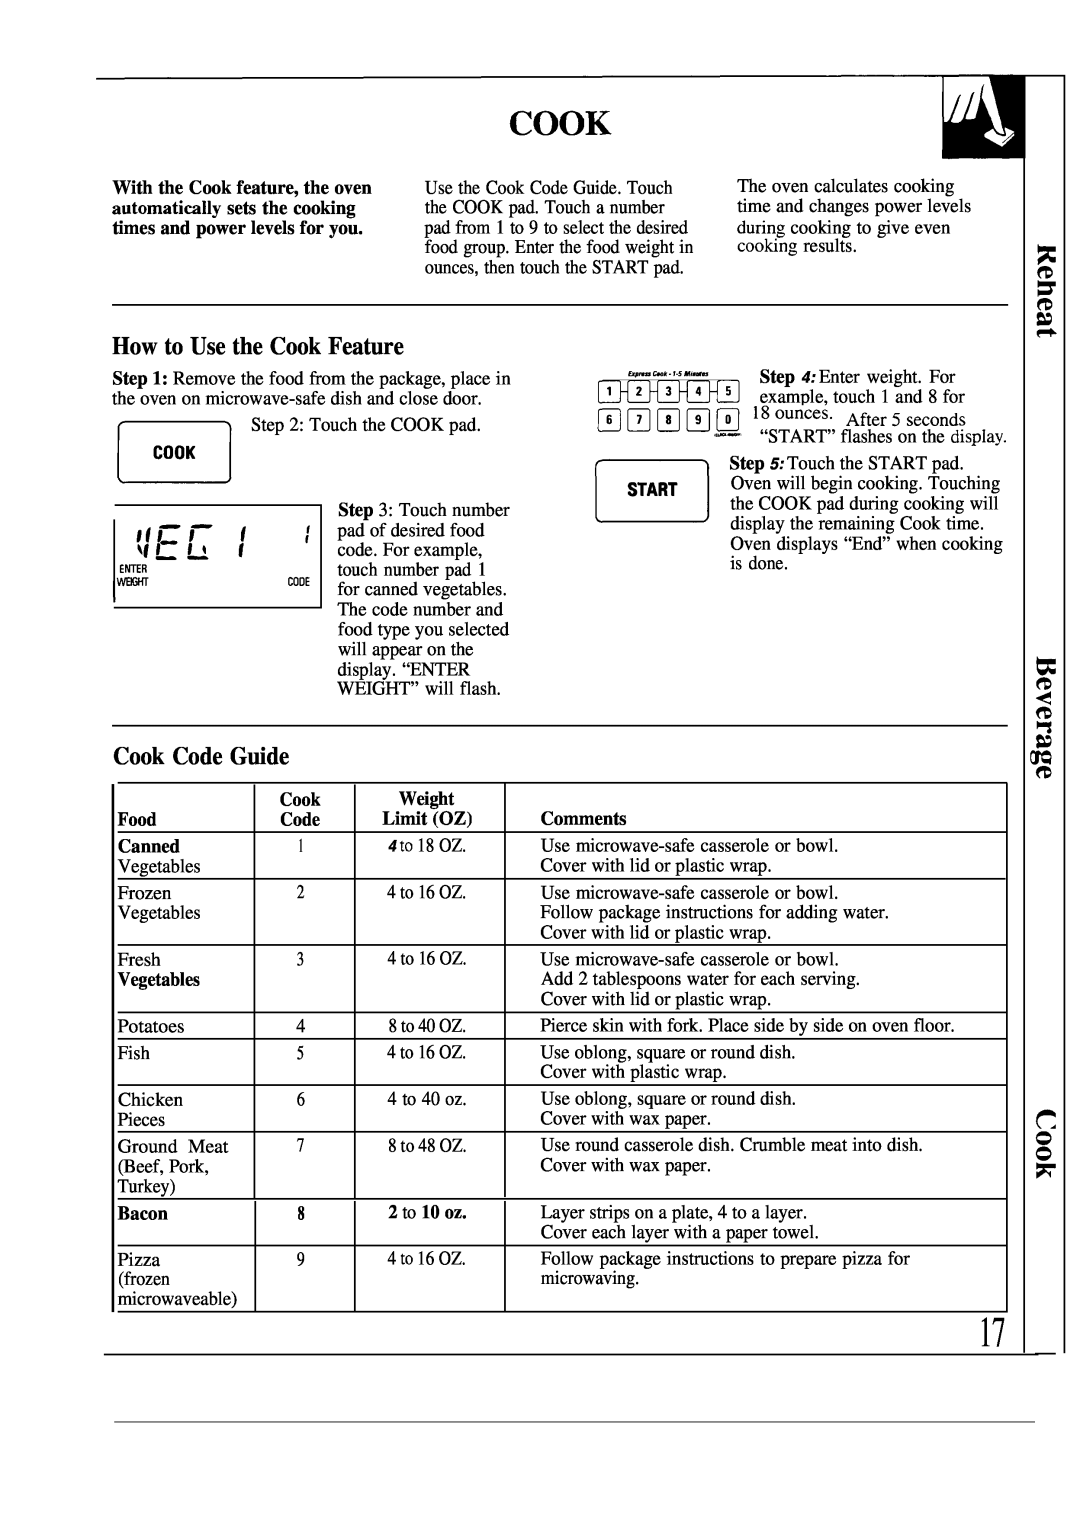 GE JVM241WL, 49-8391 How to Use the Cook Feature, Cook Code Guide, Step, Weight, Food, Comments, Canned, Vegetables, Bacon 